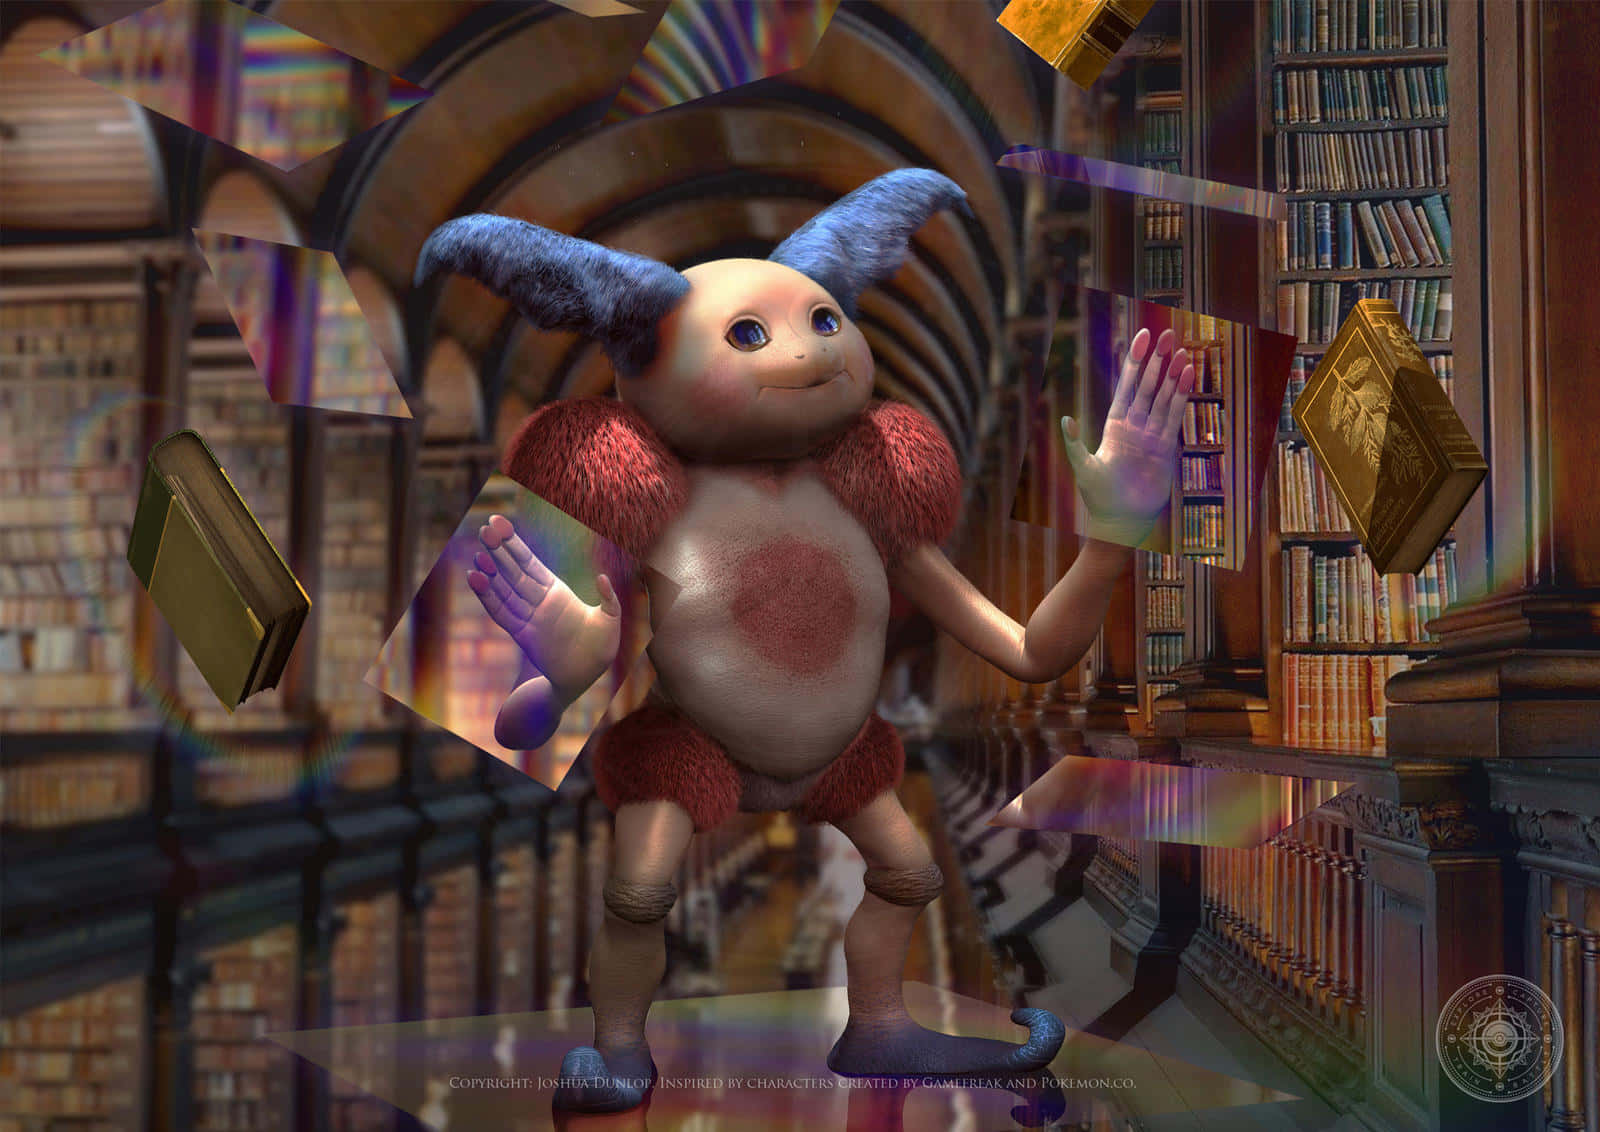 "Mr. Mime enjoying a peaceful read surrounded by knowledge and mystery" Wallpaper